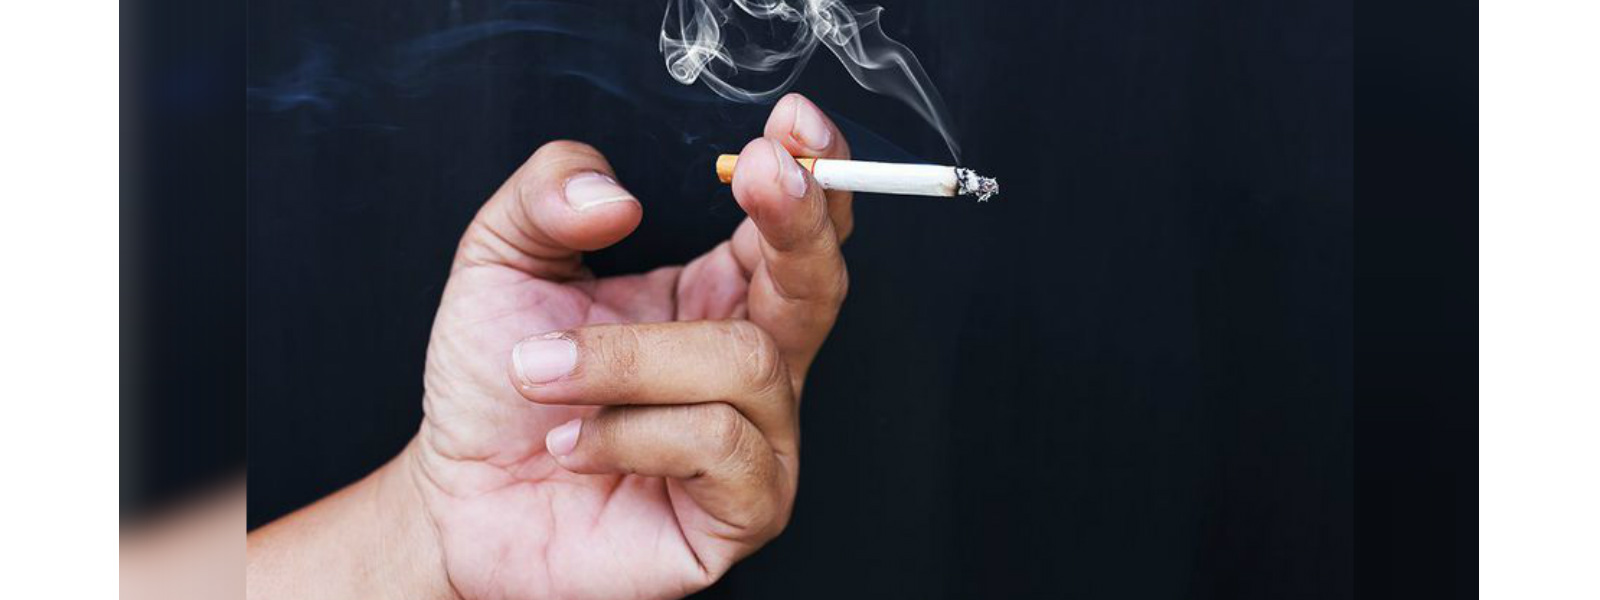 Excise tax on cigarettes increased